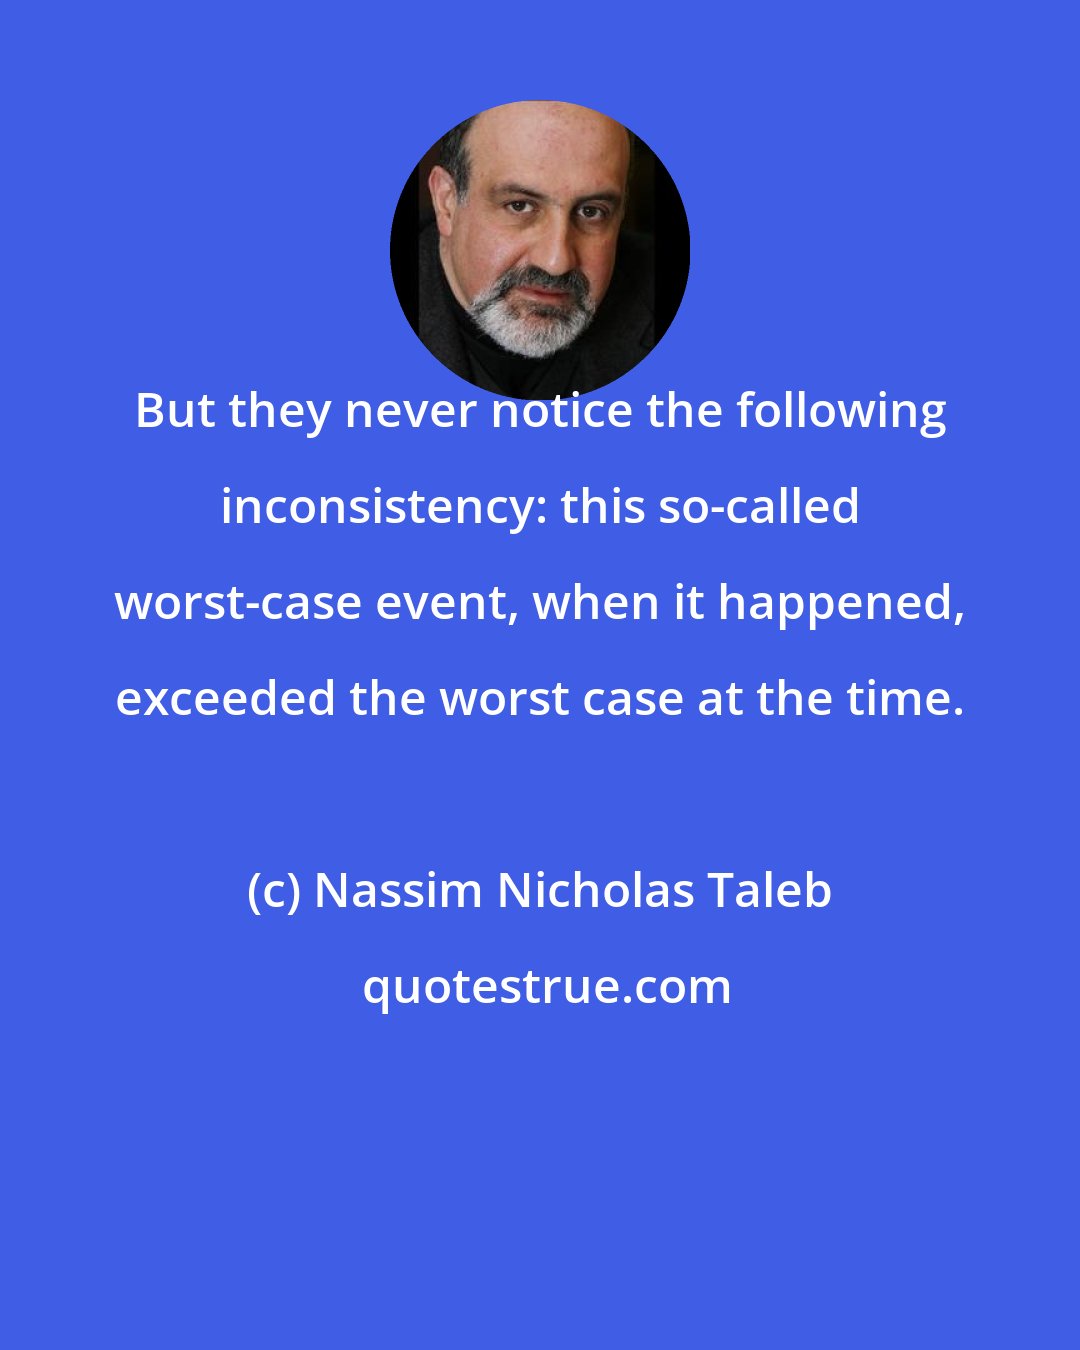 Nassim Nicholas Taleb: But they never notice the following inconsistency: this so-called worst-case event, when it happened, exceeded the worst case at the time.